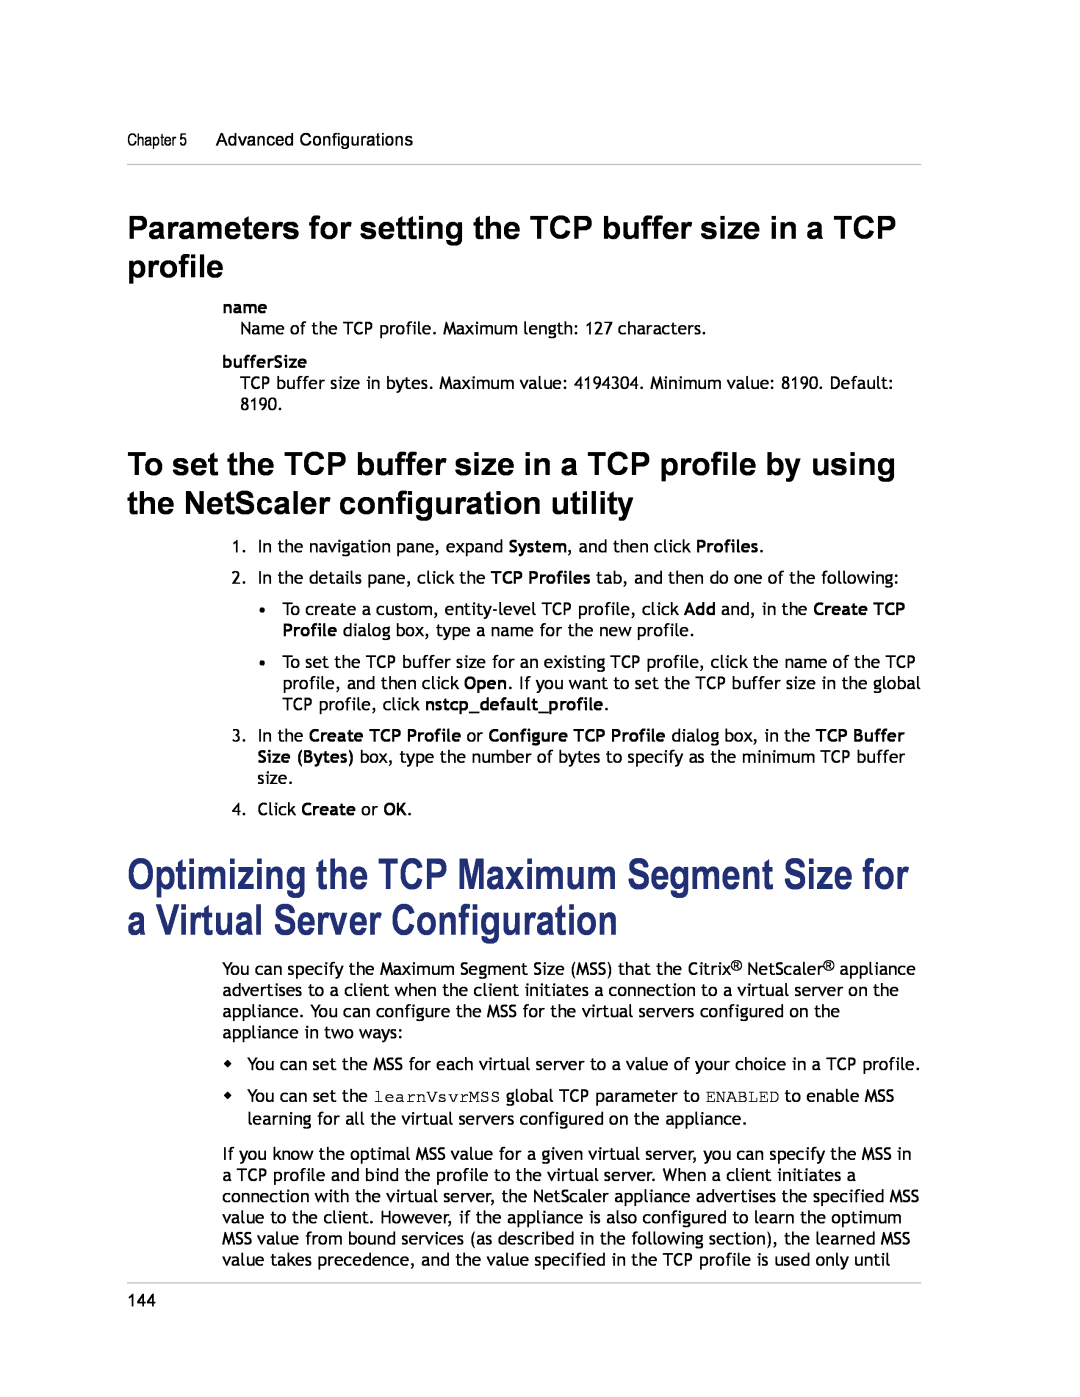 Citrix Systems CITRIX NETSCALER 9.3 manual Parameters for setting the TCP buffer size in a TCP profile, bufferSize, name 